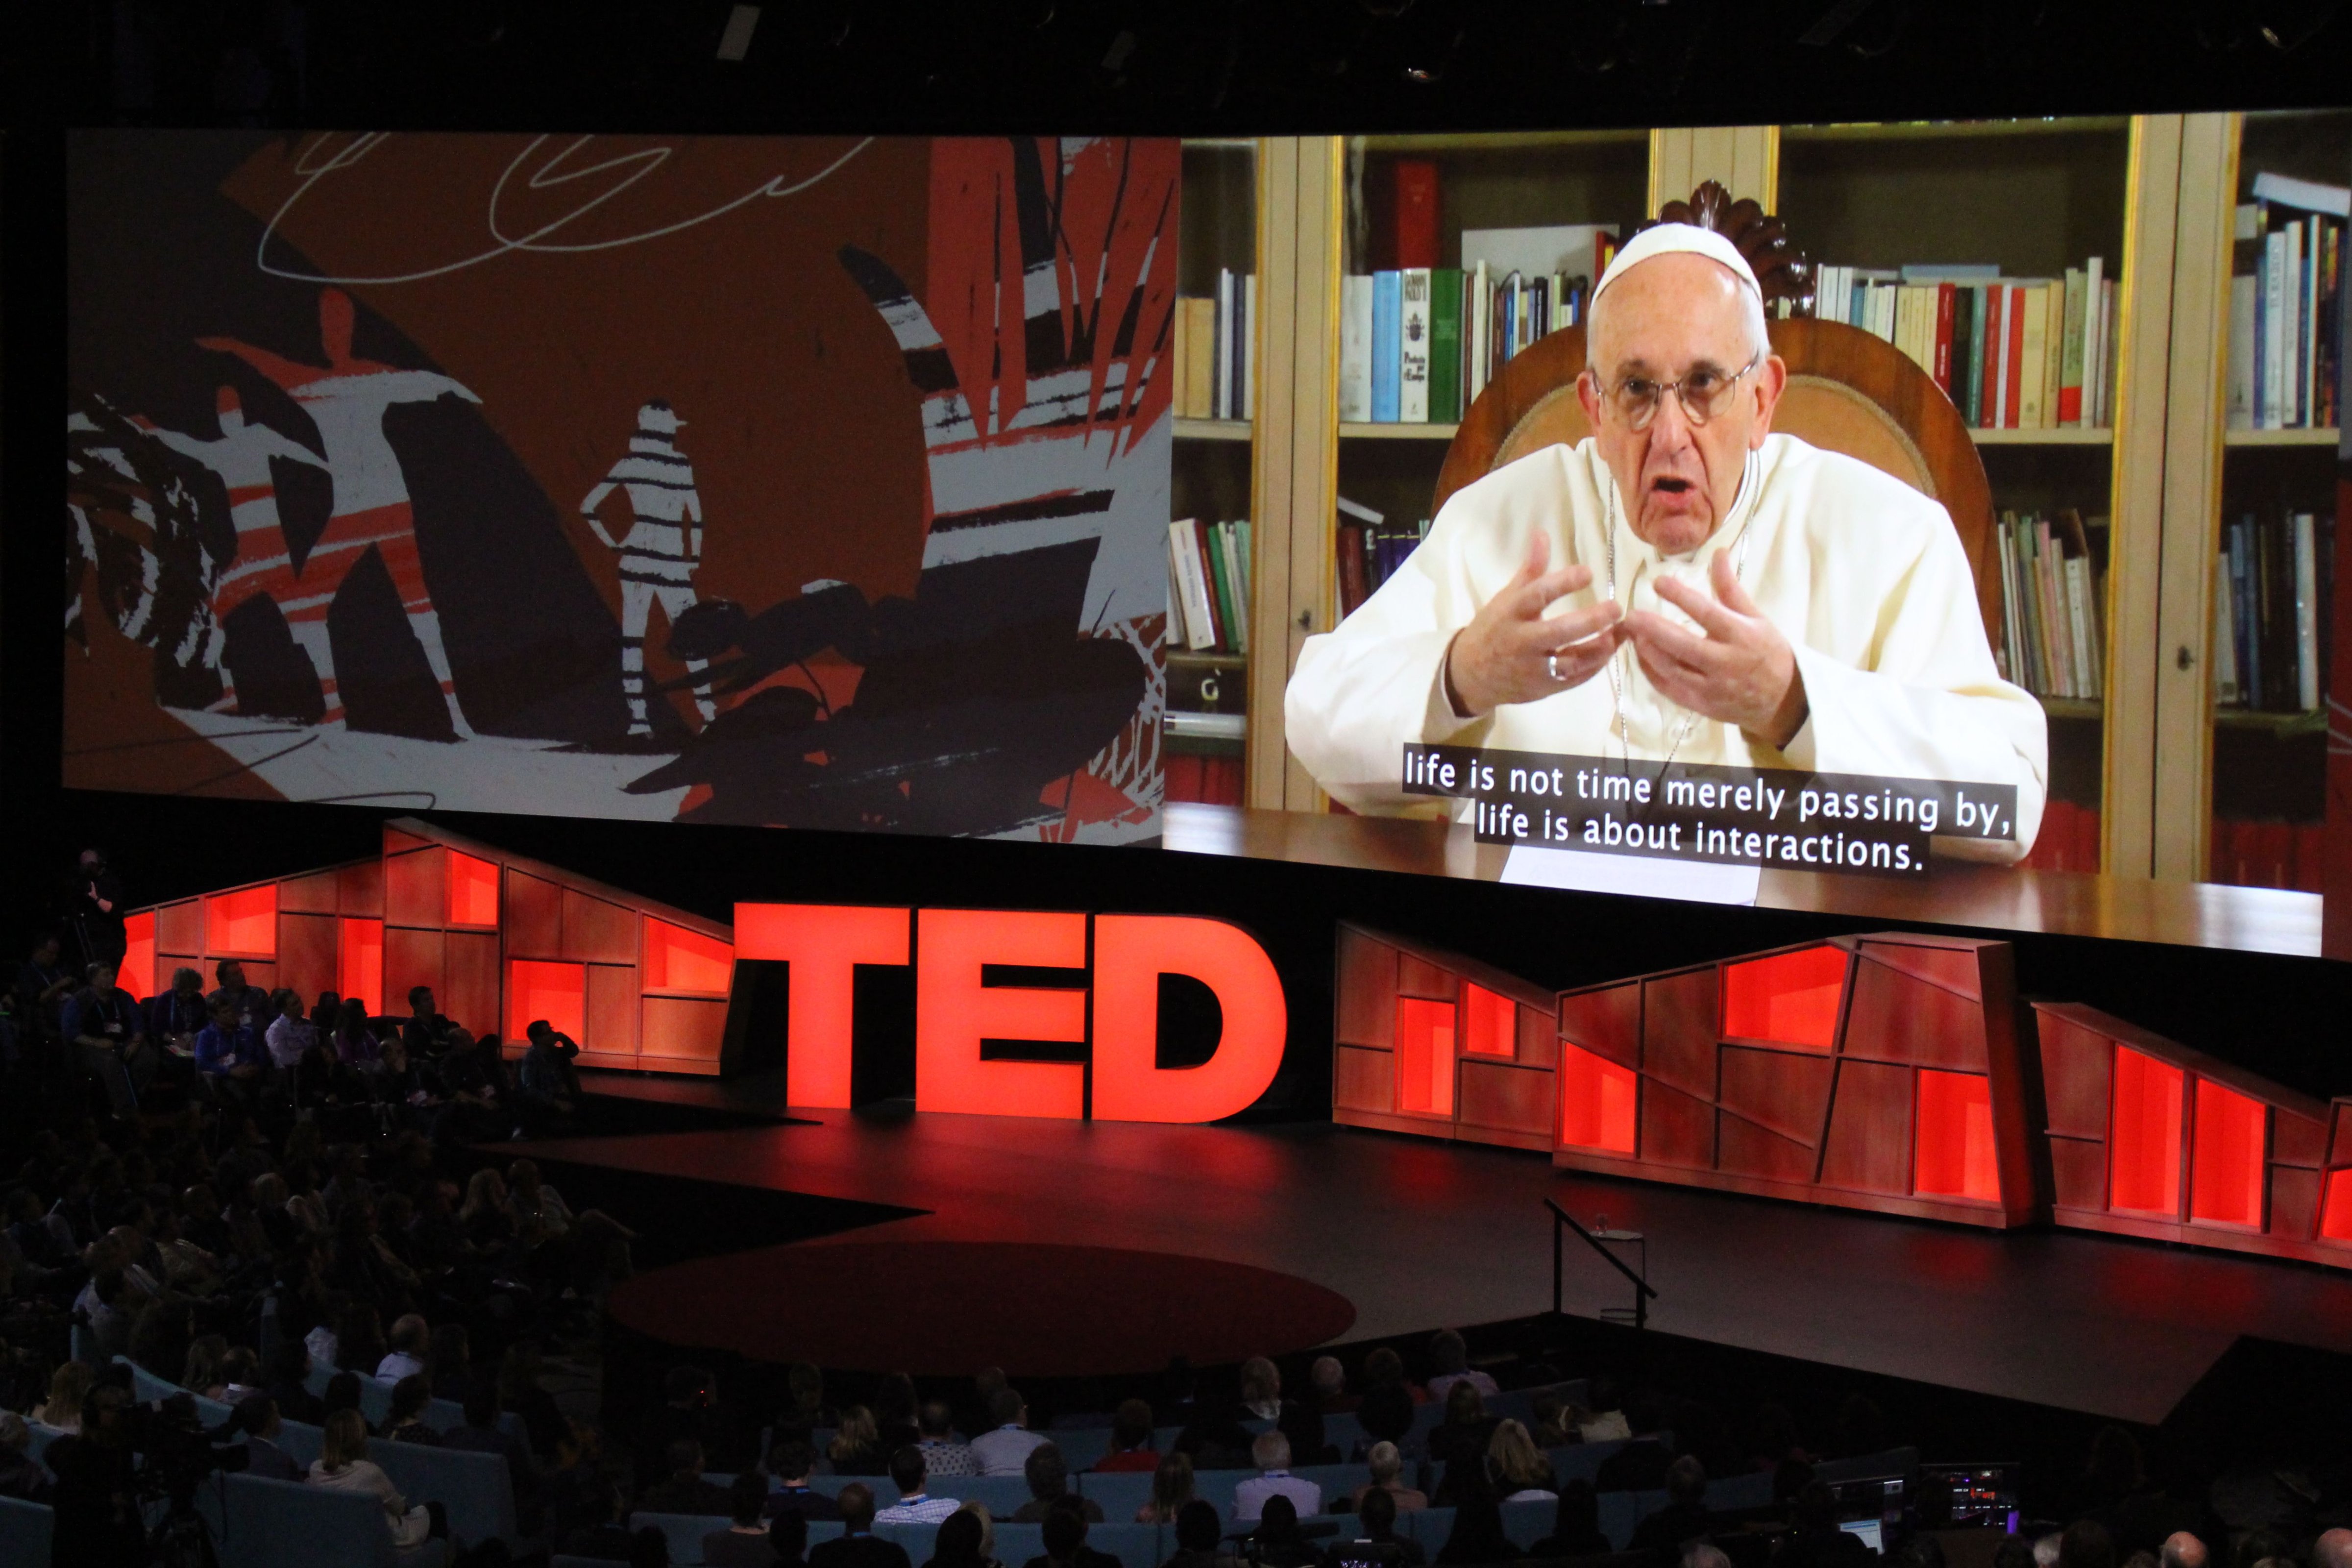 Pope Francis speaks during the TED Conference, urging people to connect with and understand others, in Vancouver, Canada, April 25, 2017. (Glenn Chapman—AFP/Getty Images)